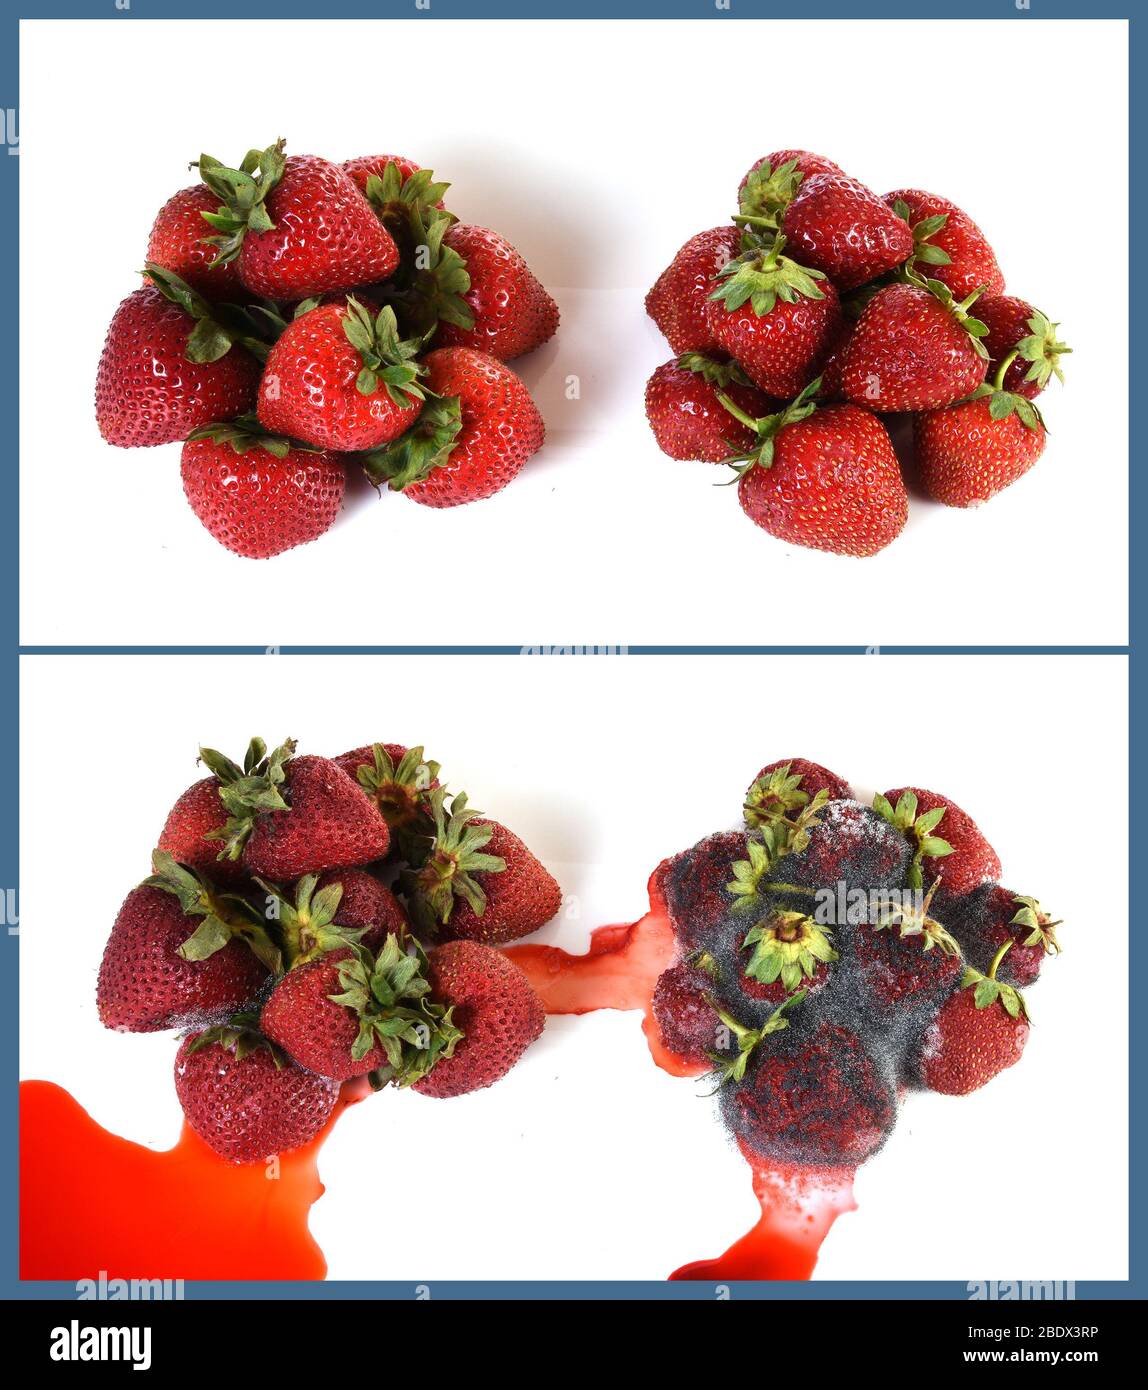 Strawberries Becoming Moldy Stock Photo